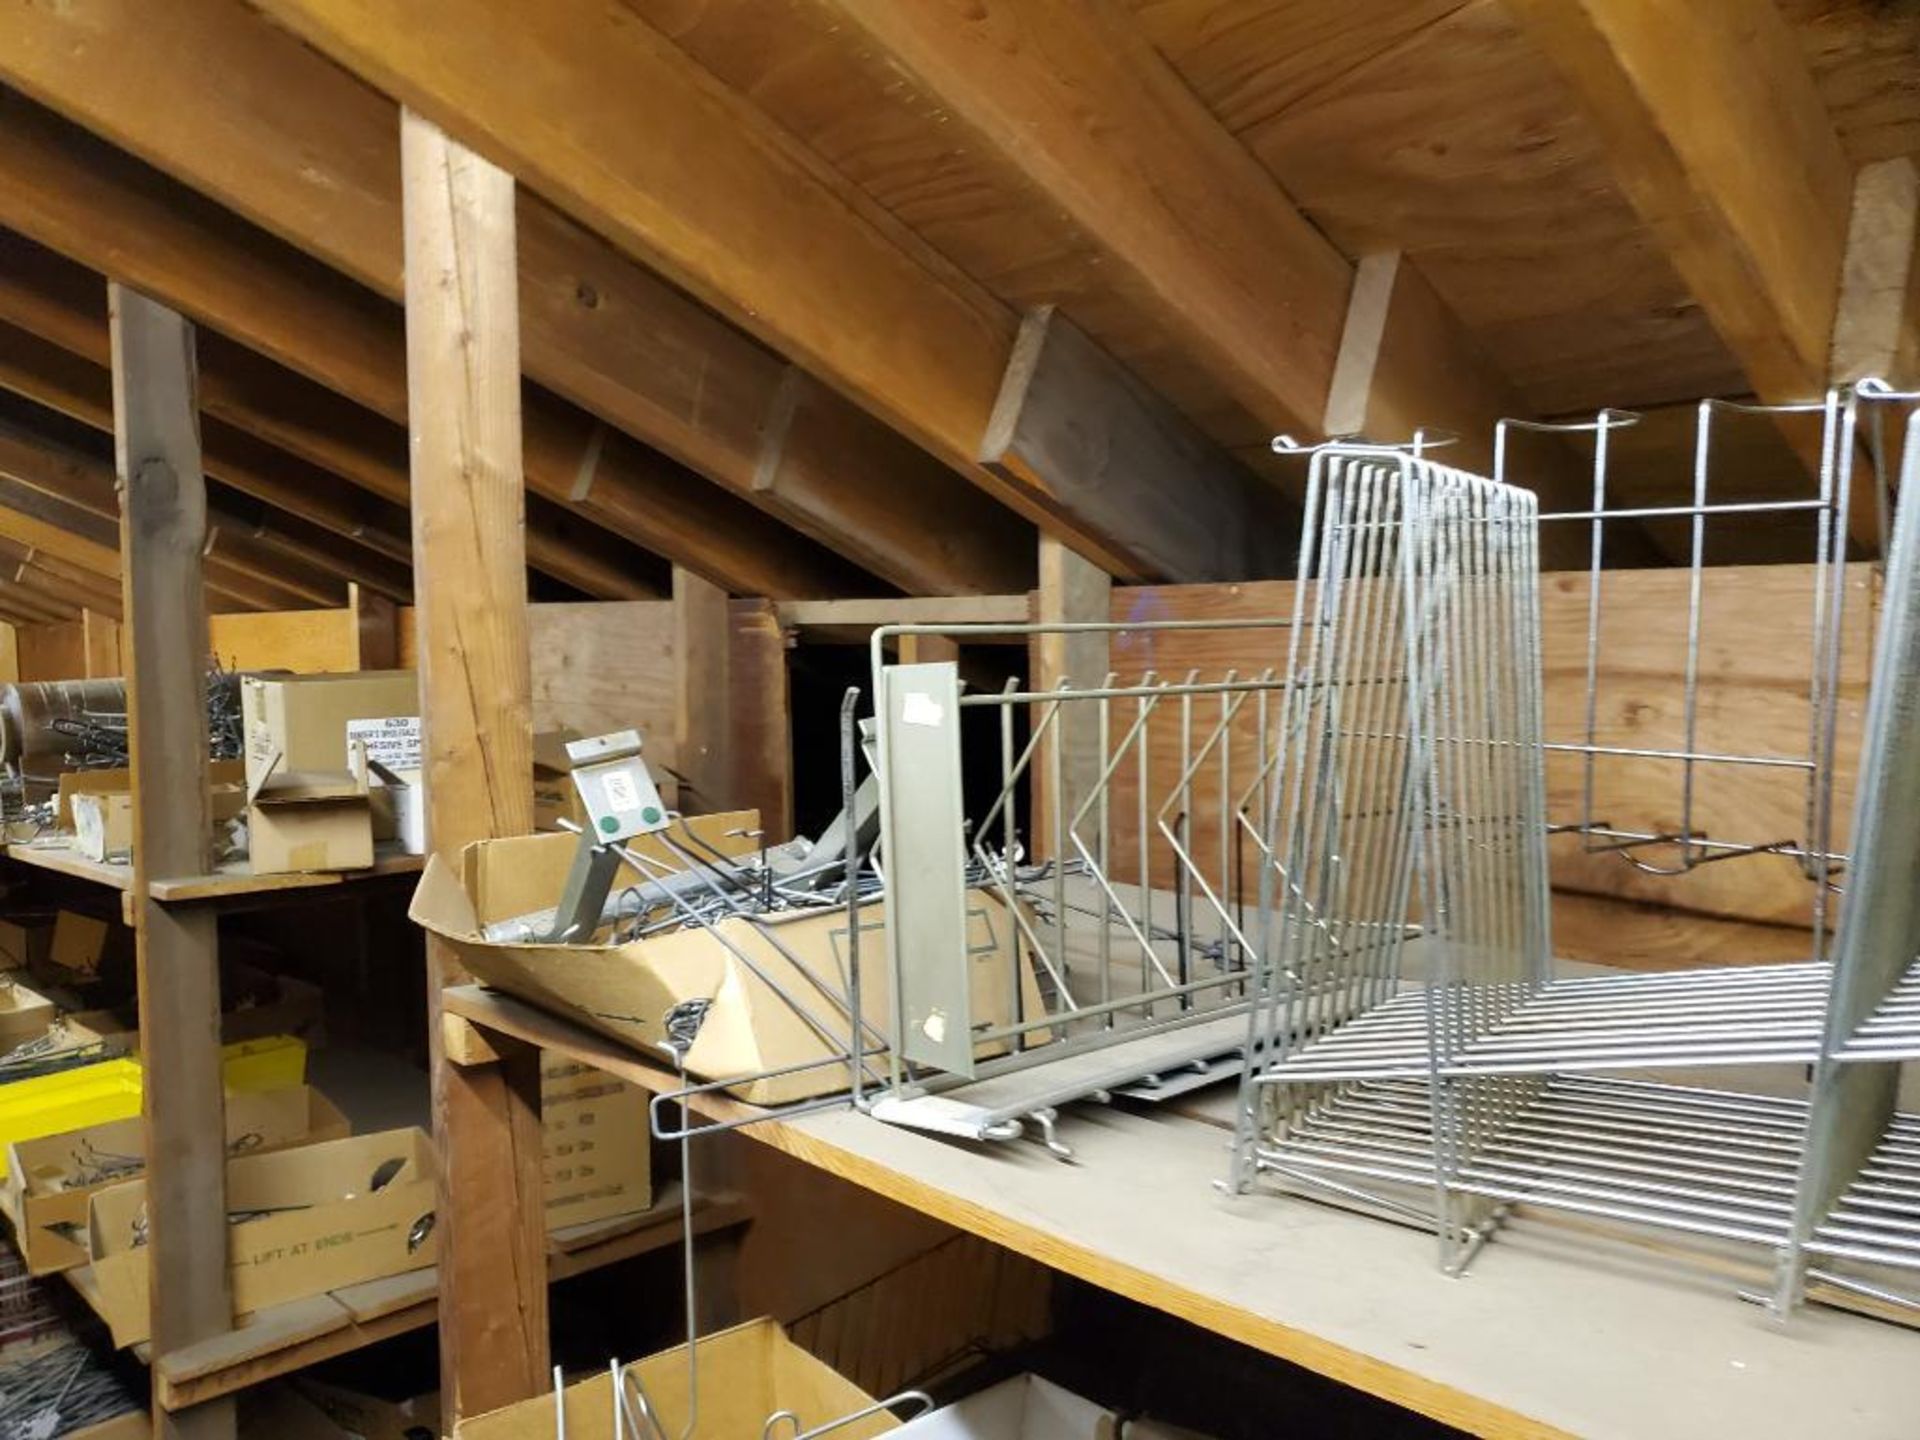 Large assortment of shelving components in attic. - Image 11 of 17